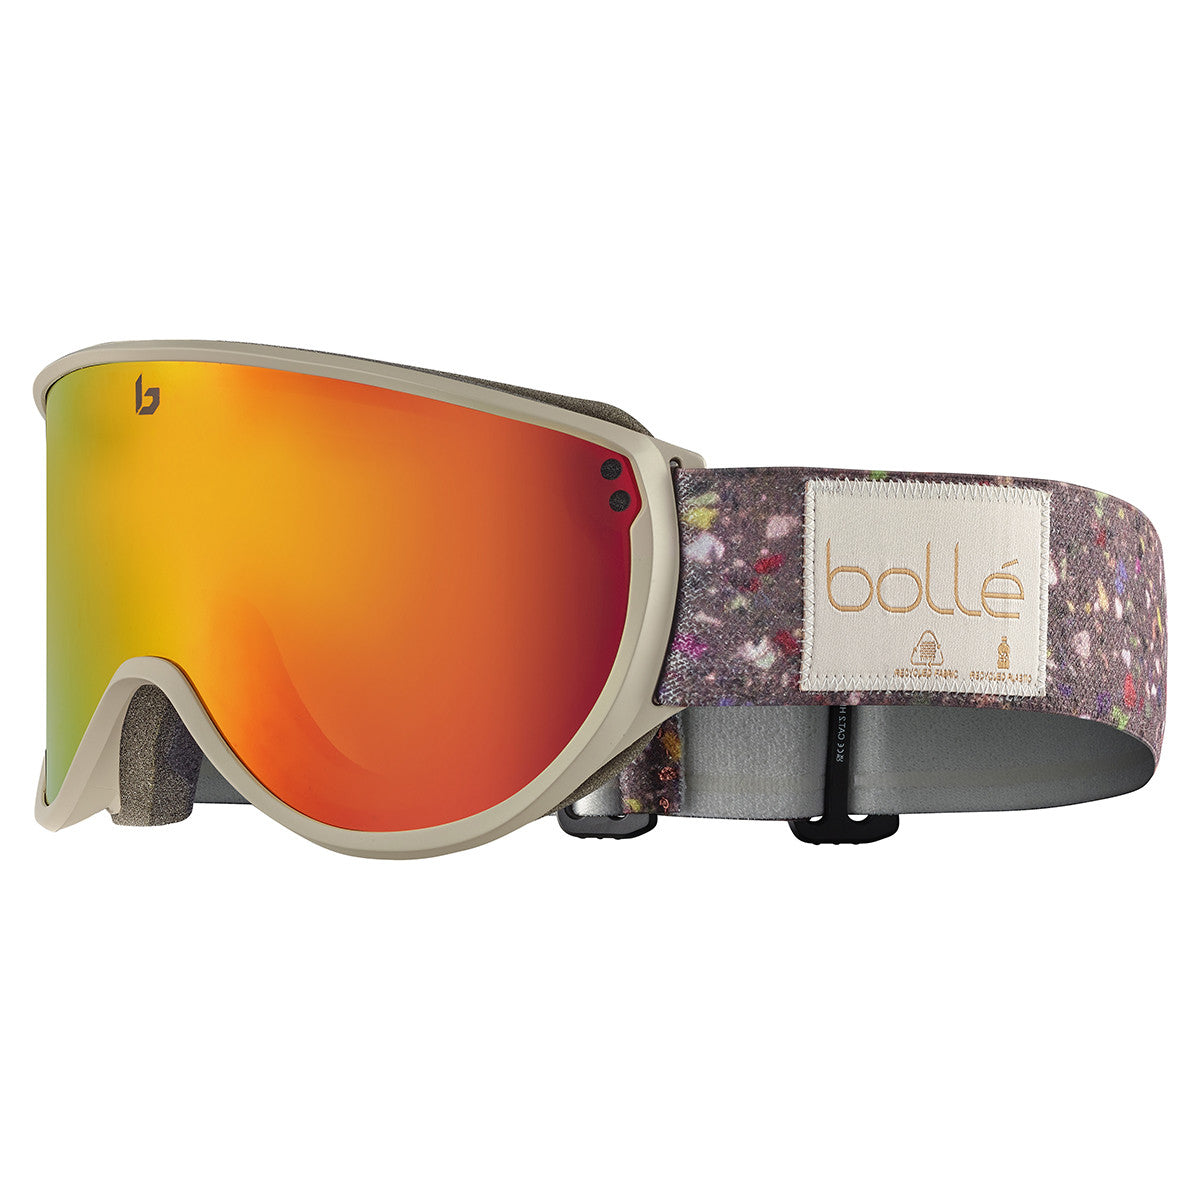 Bolle Eco Blanca Goggles  Oatmeal Matte Small One size